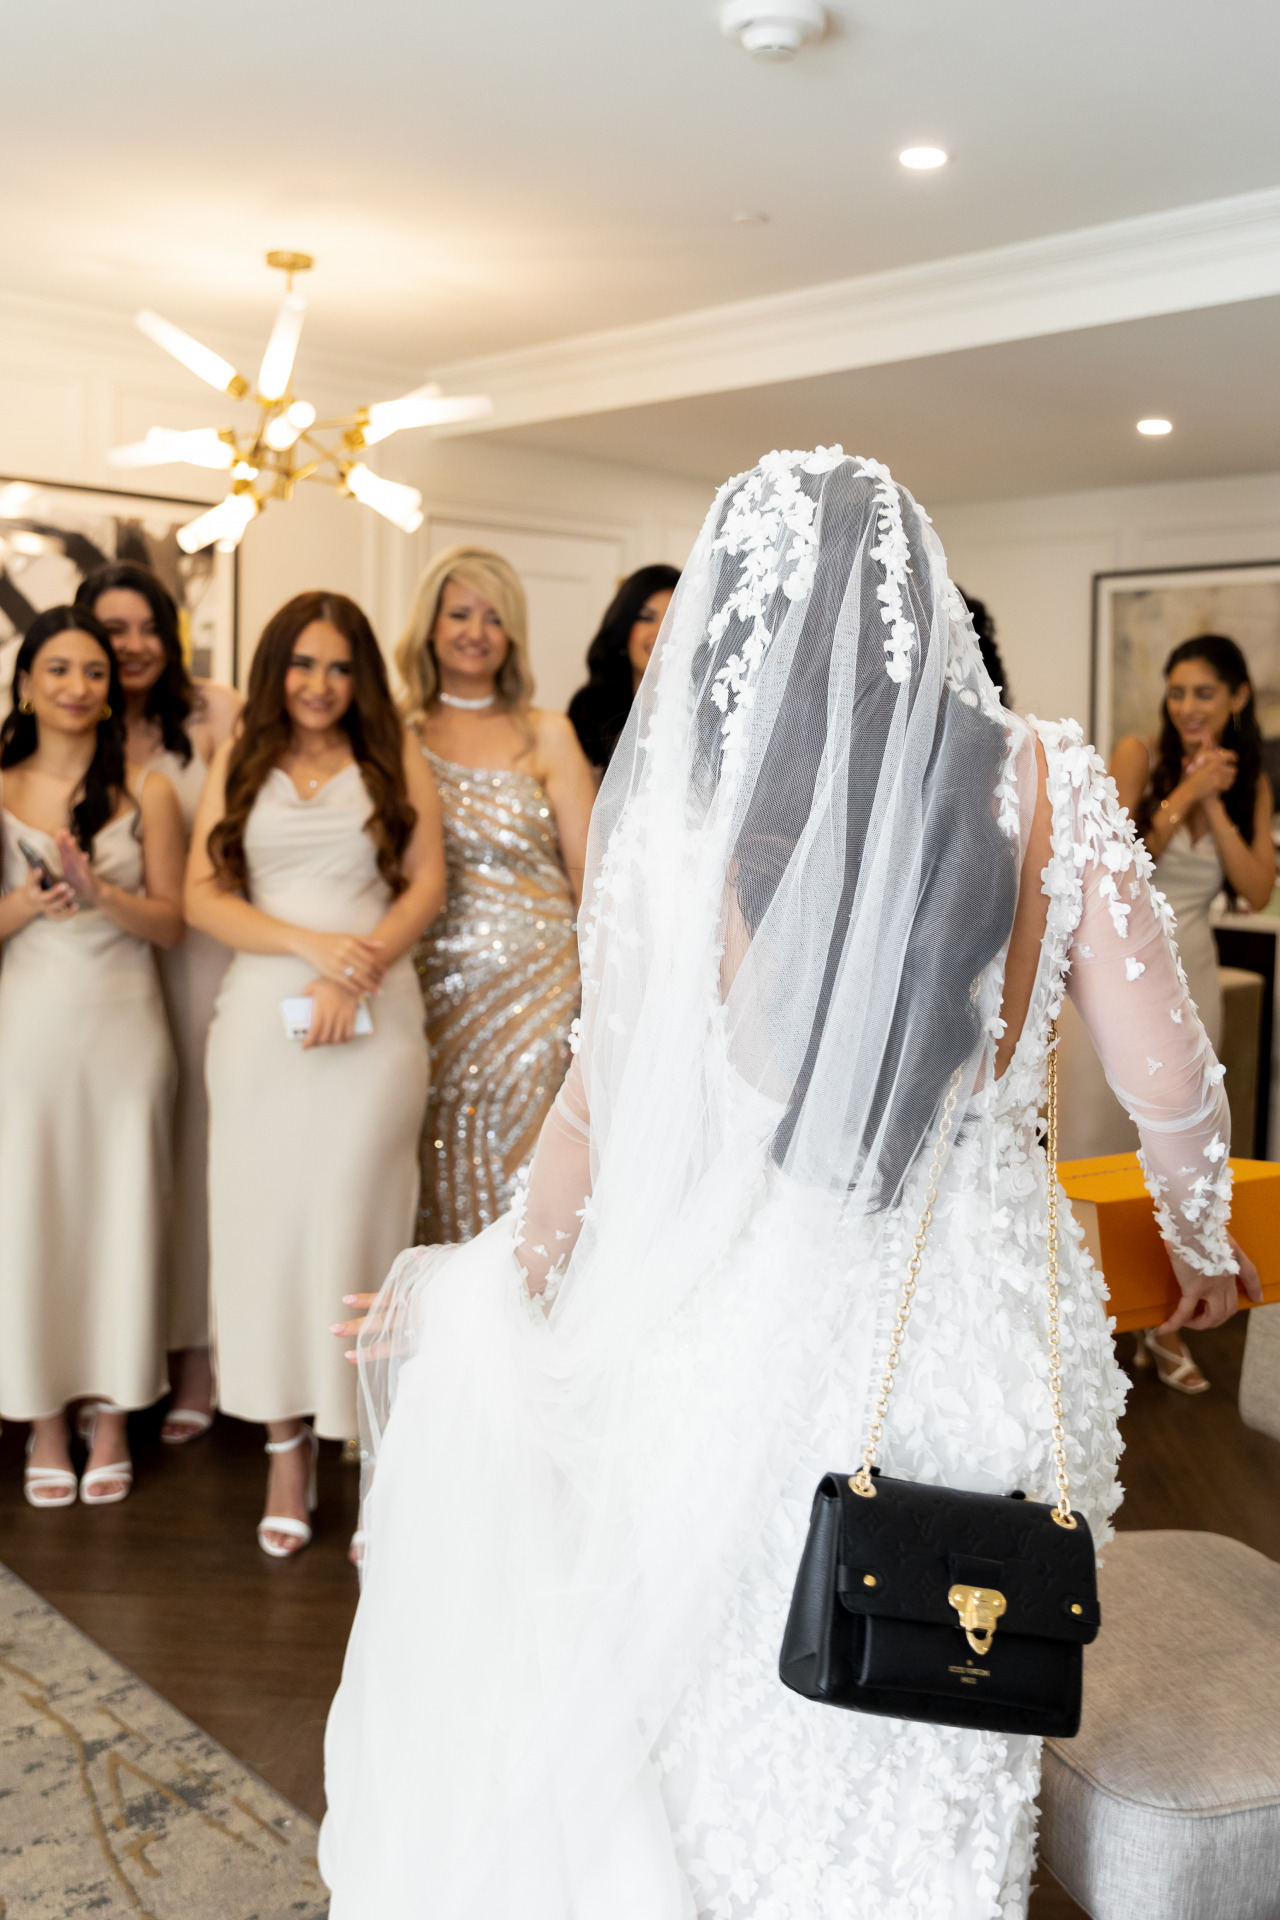 Egyprian coptic wedding editorial style in New Jersey 29